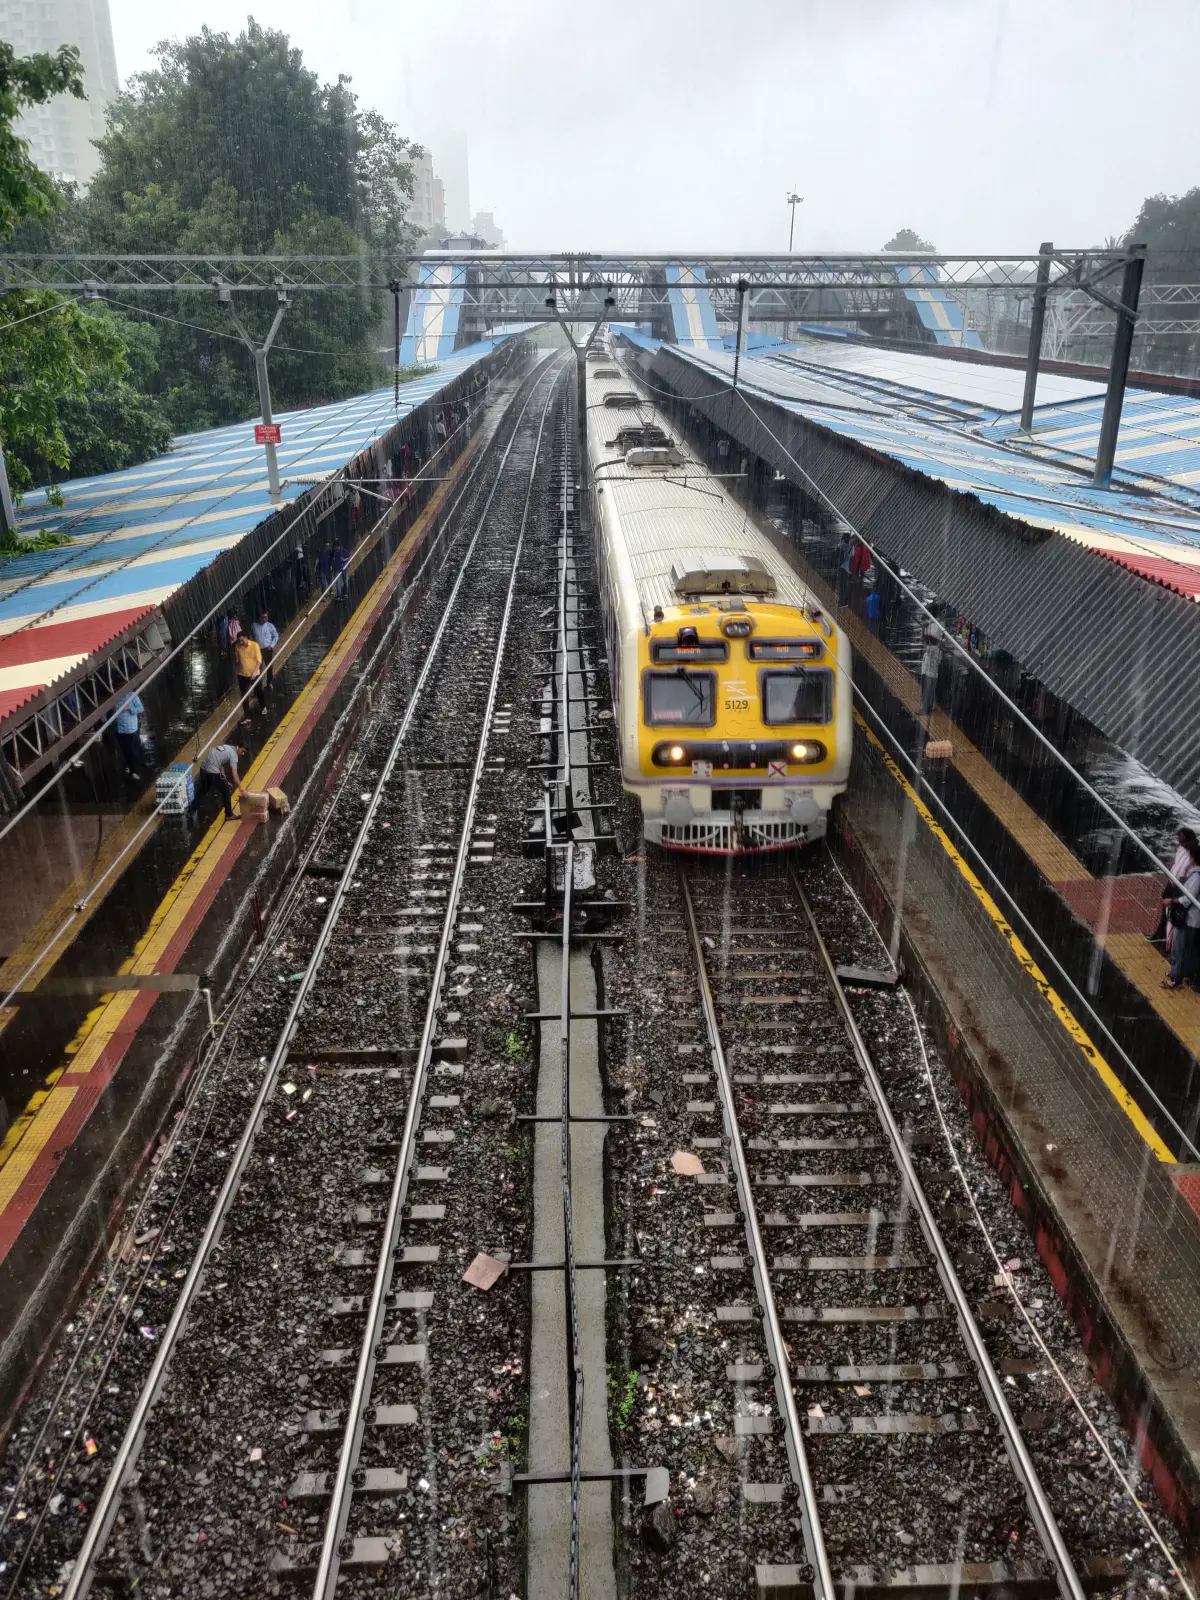 A train pulls into a station on a rainy day.